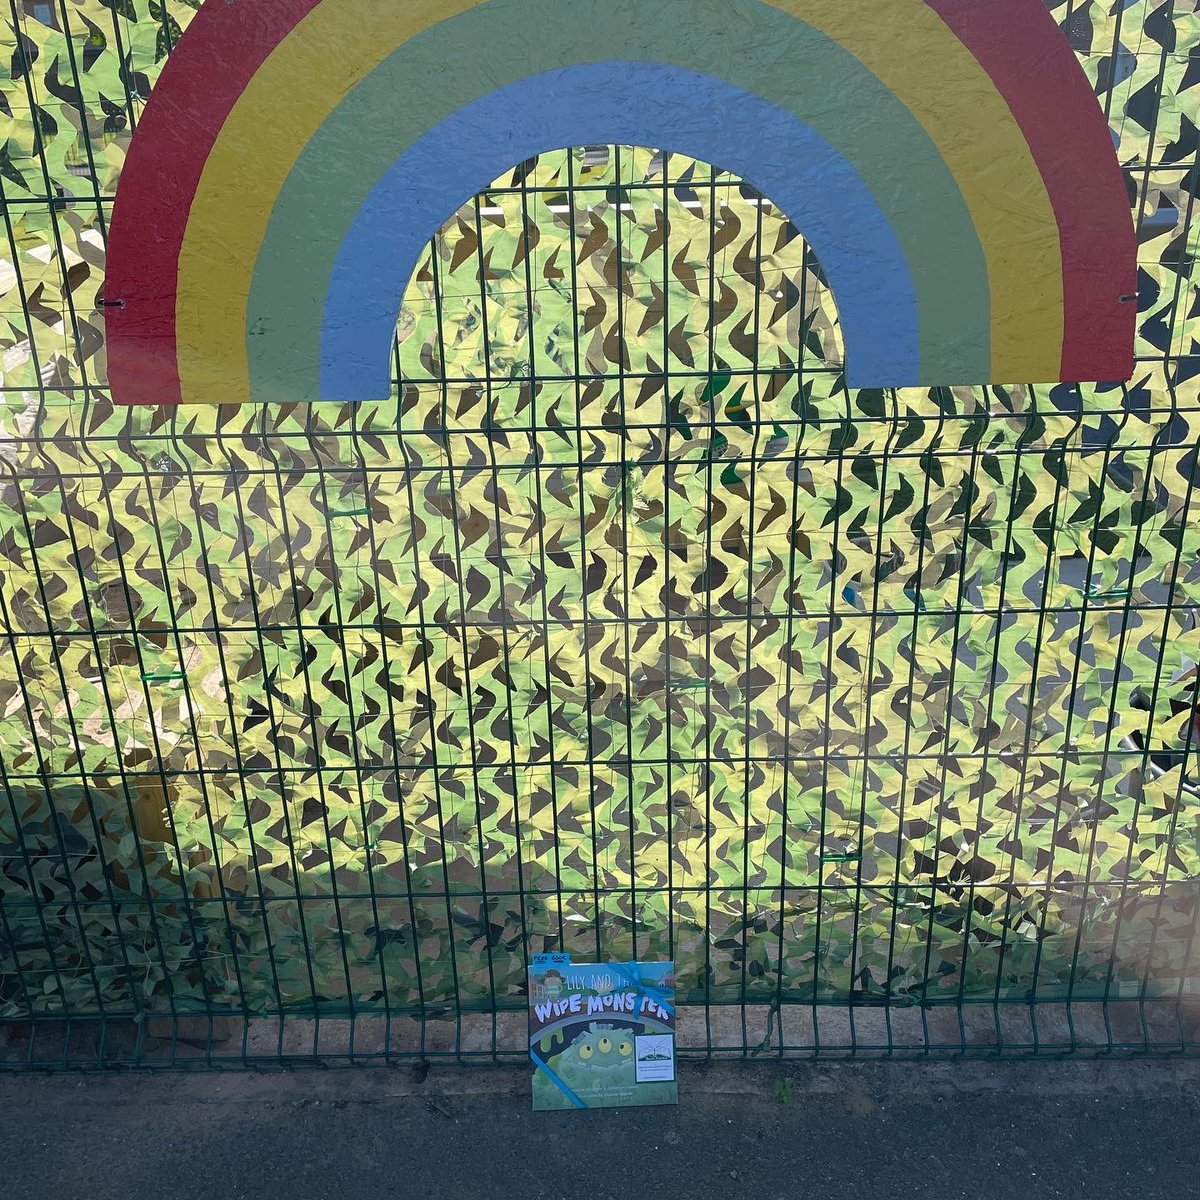 As part of our #GreenBookFairies activity alongside #PlasticFreeJuly, a book fairy has left this copy of Lily and the Wipe Monster at Fernwood Village Day Nursery #ibelieveinbookfairies #TBFLily #puraparenting #timeforachange #pura #ecobooks #ecoparenting #greenparenting #mumsnet